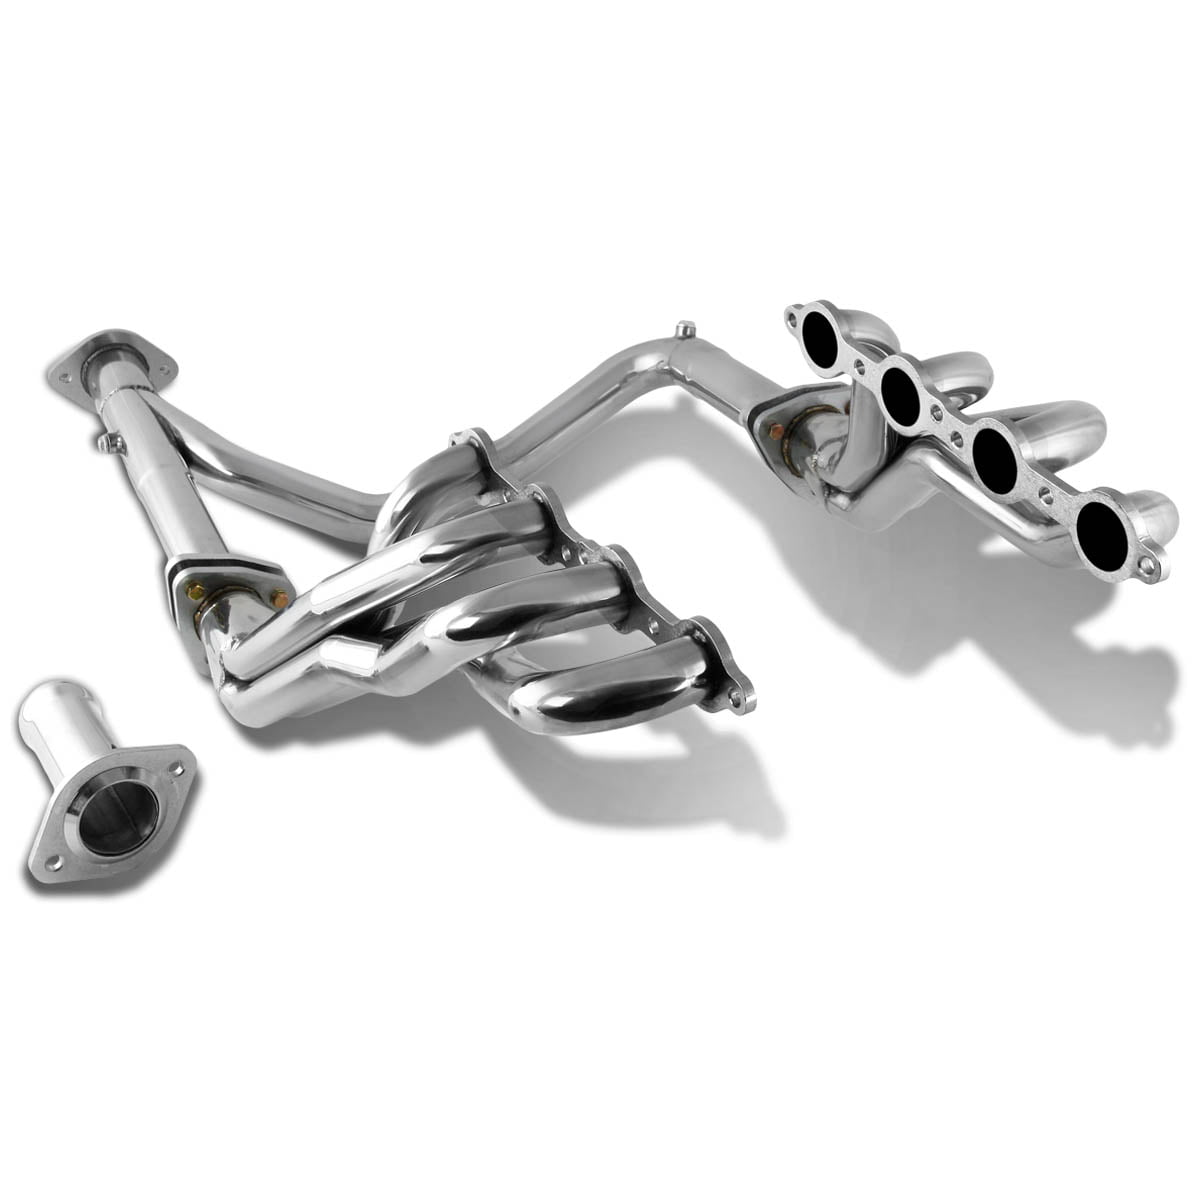 Replacement for Chevy Tahoe/GMC Yukon 4.8L 5.3L 6.0L V8 TRI-Y Long Tube Exhaust Header Manifold